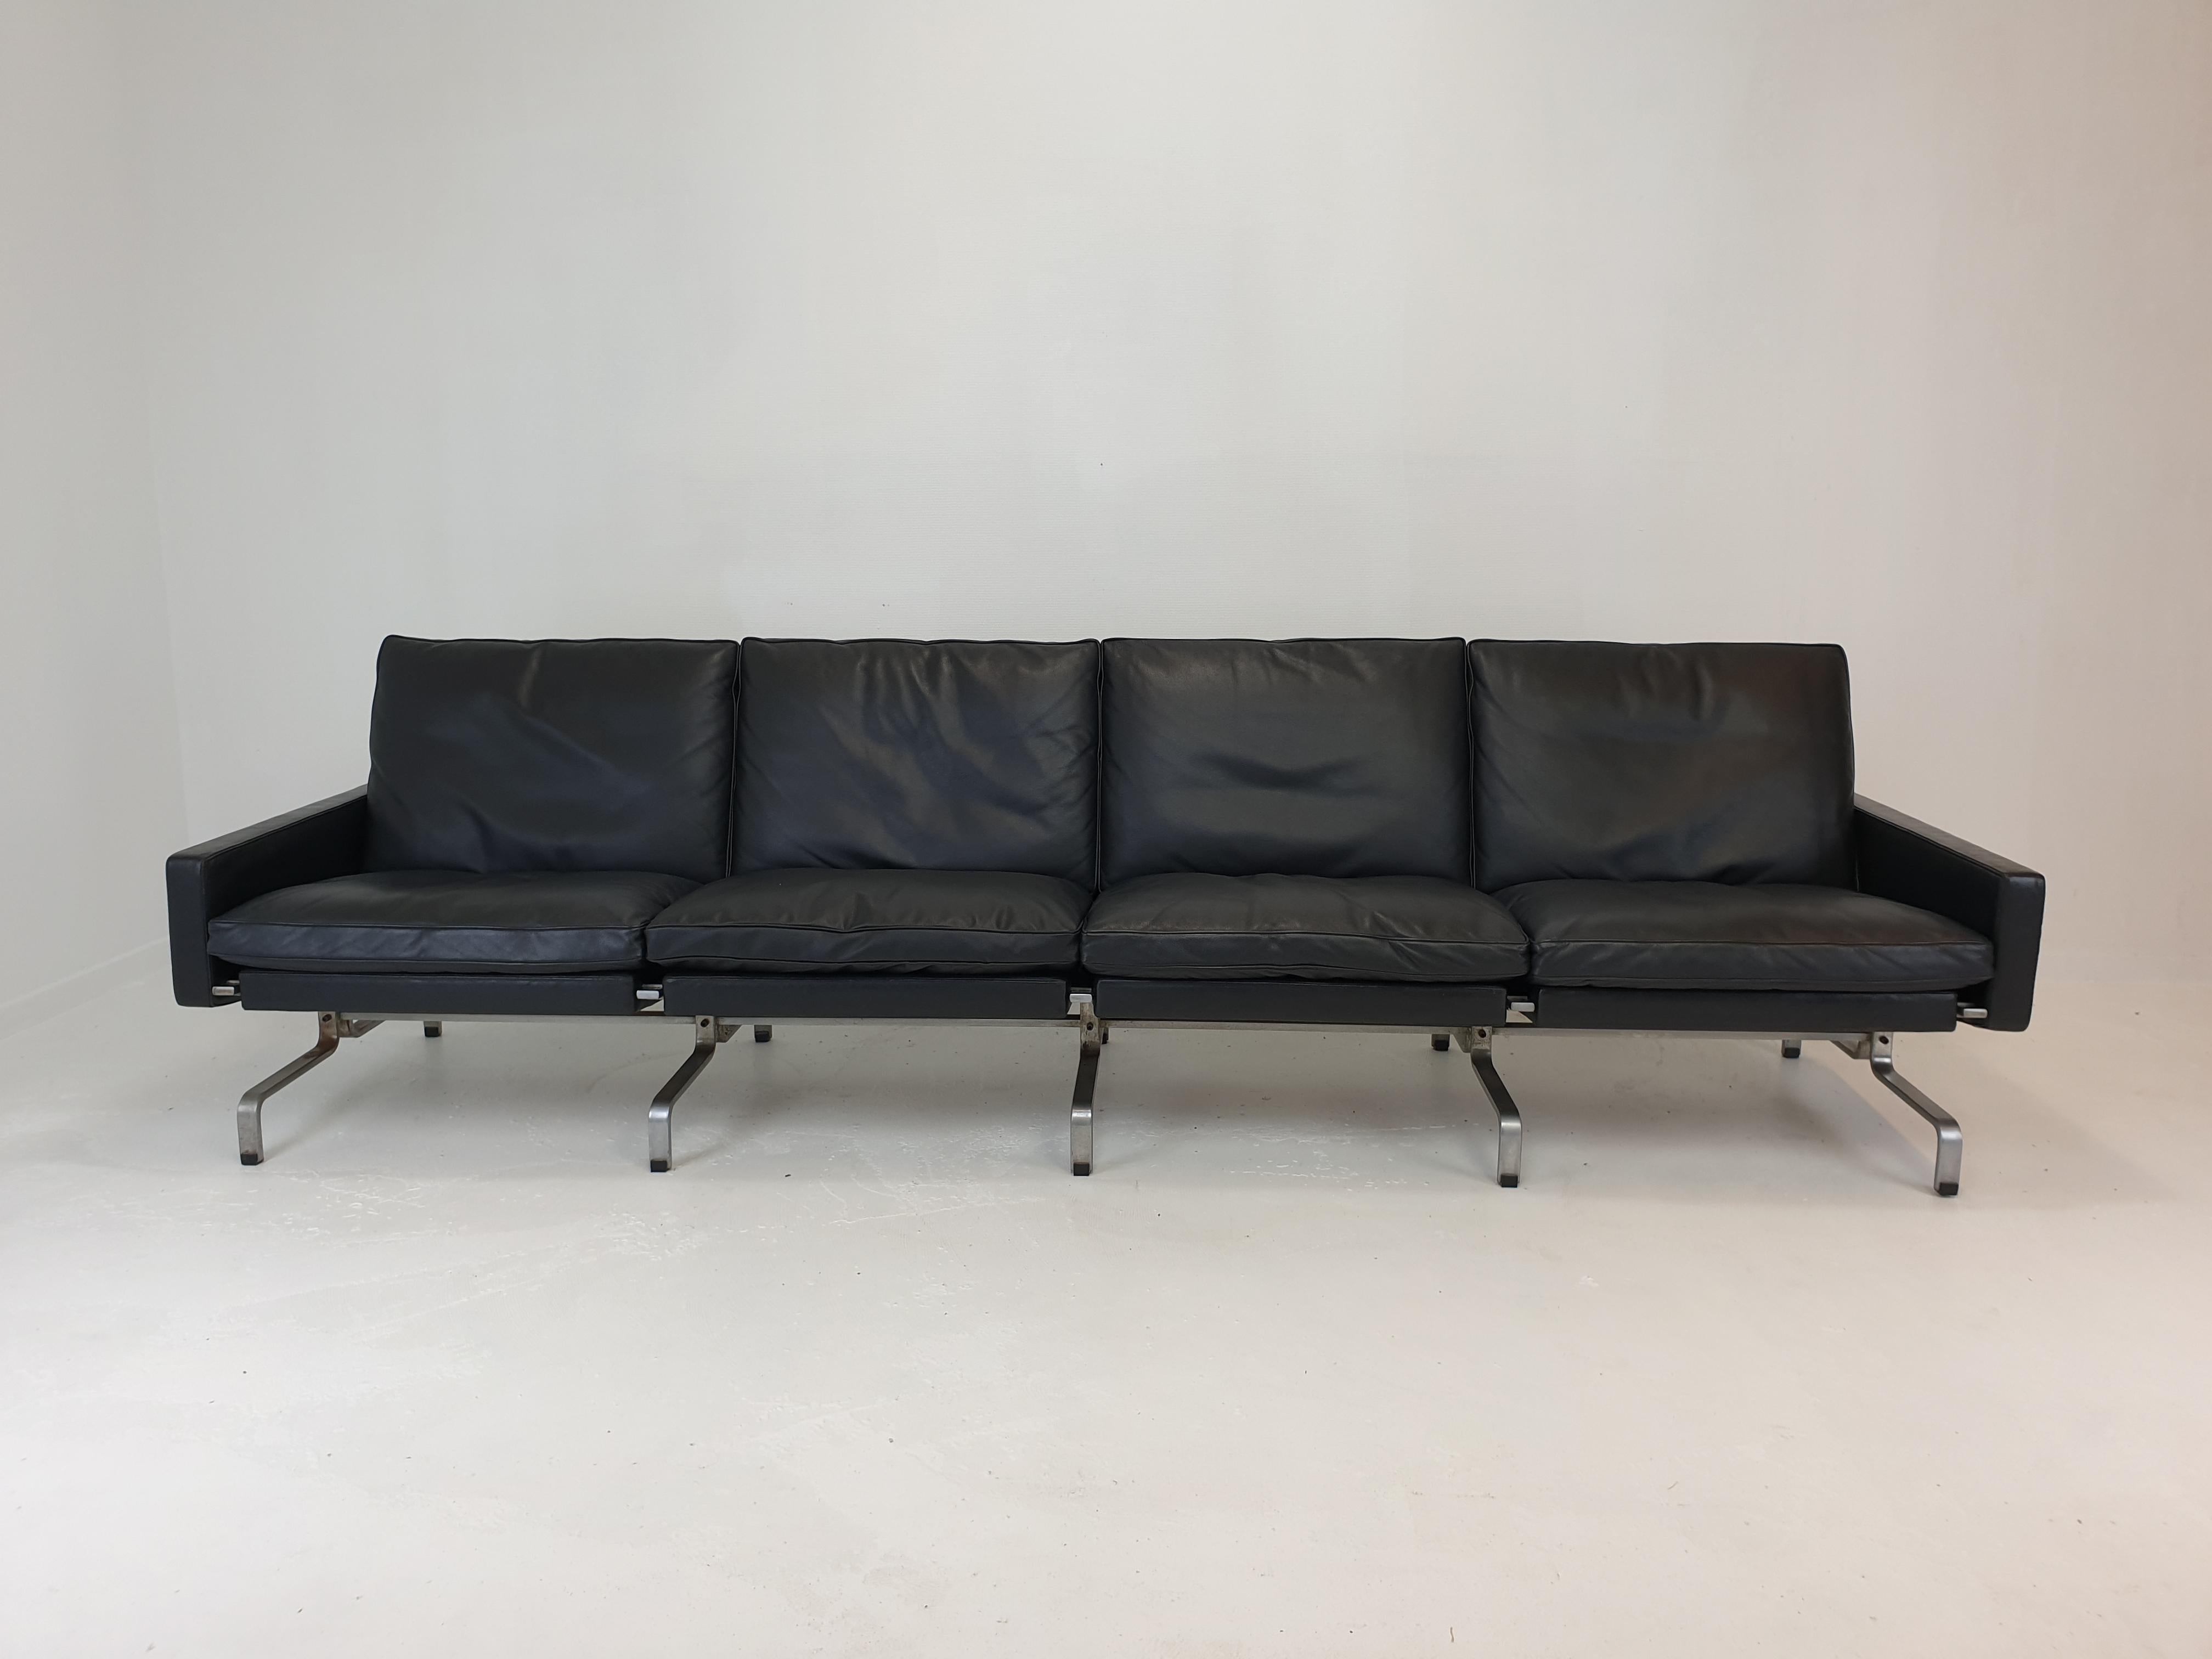 Very rare and exceptional 4 seat PK31 sofa.
This stunning sofa is designed by Poul Kjærholm for E. Kold Christensen, Denmark 1950's.

Beautiful and high quality original black leather with great patina on the sofa. 
Renewed soft and comfortable